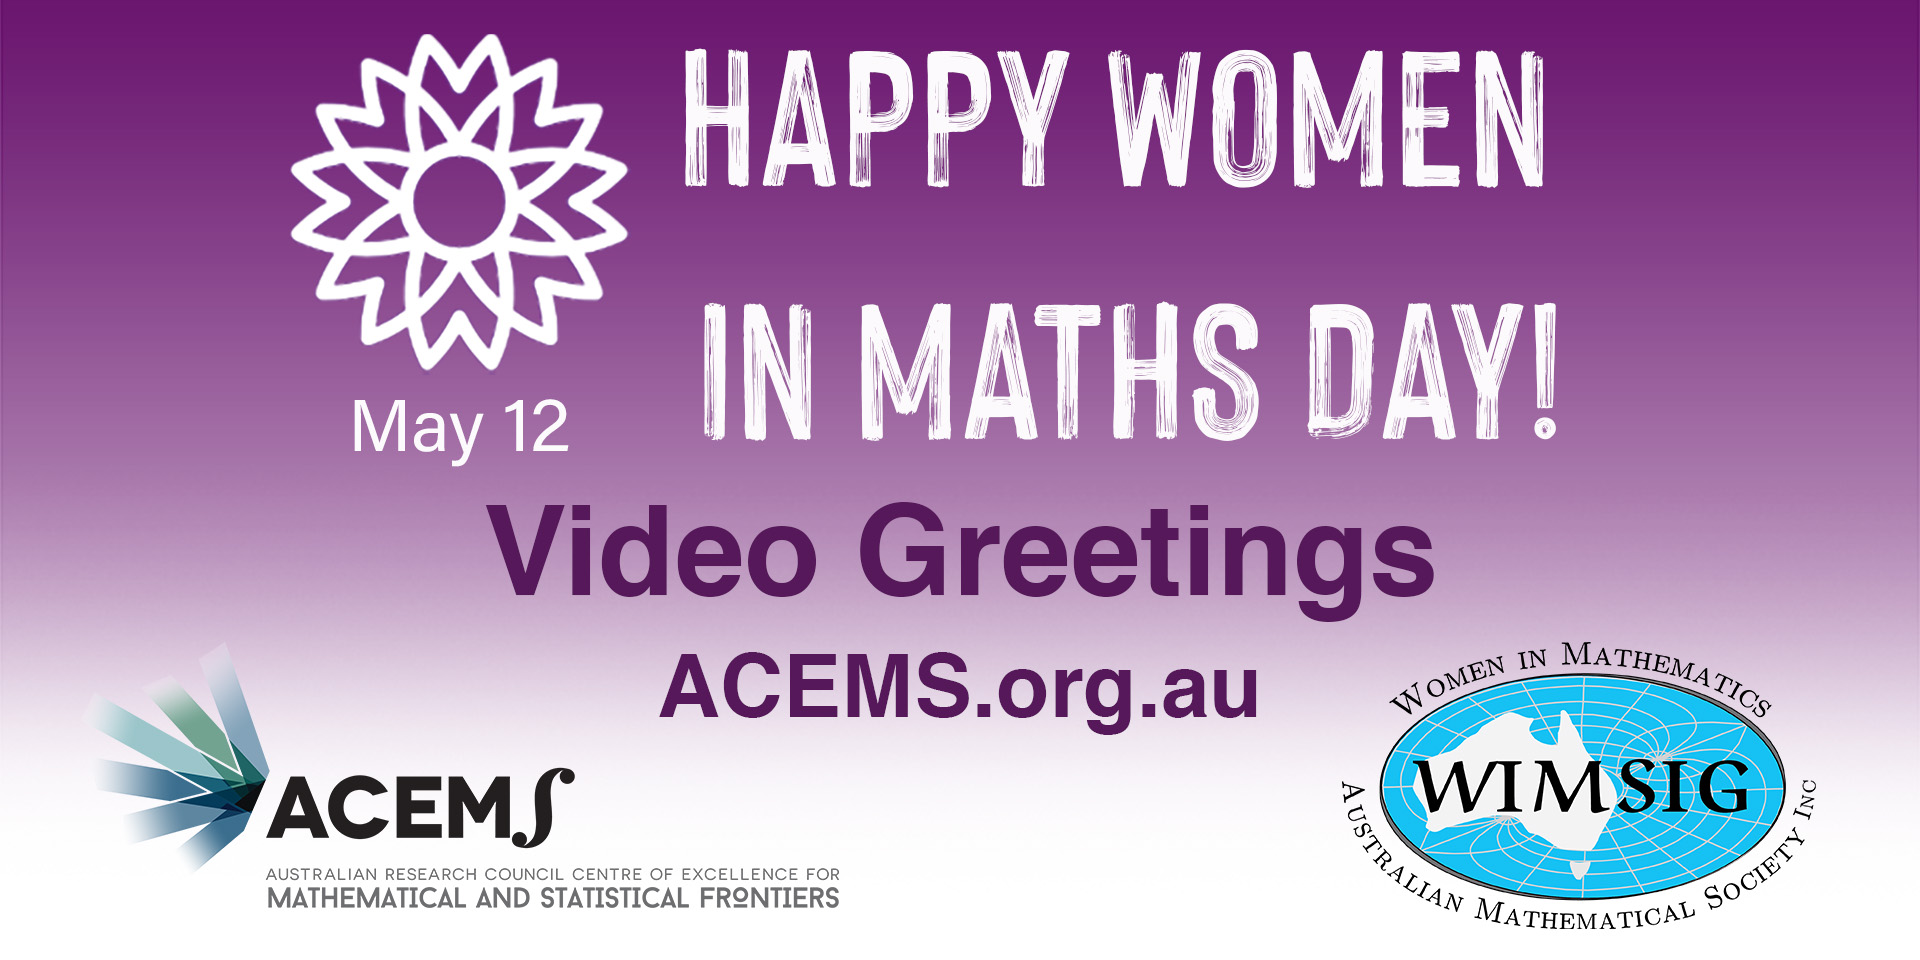 Women in Maths Day Video Greetings